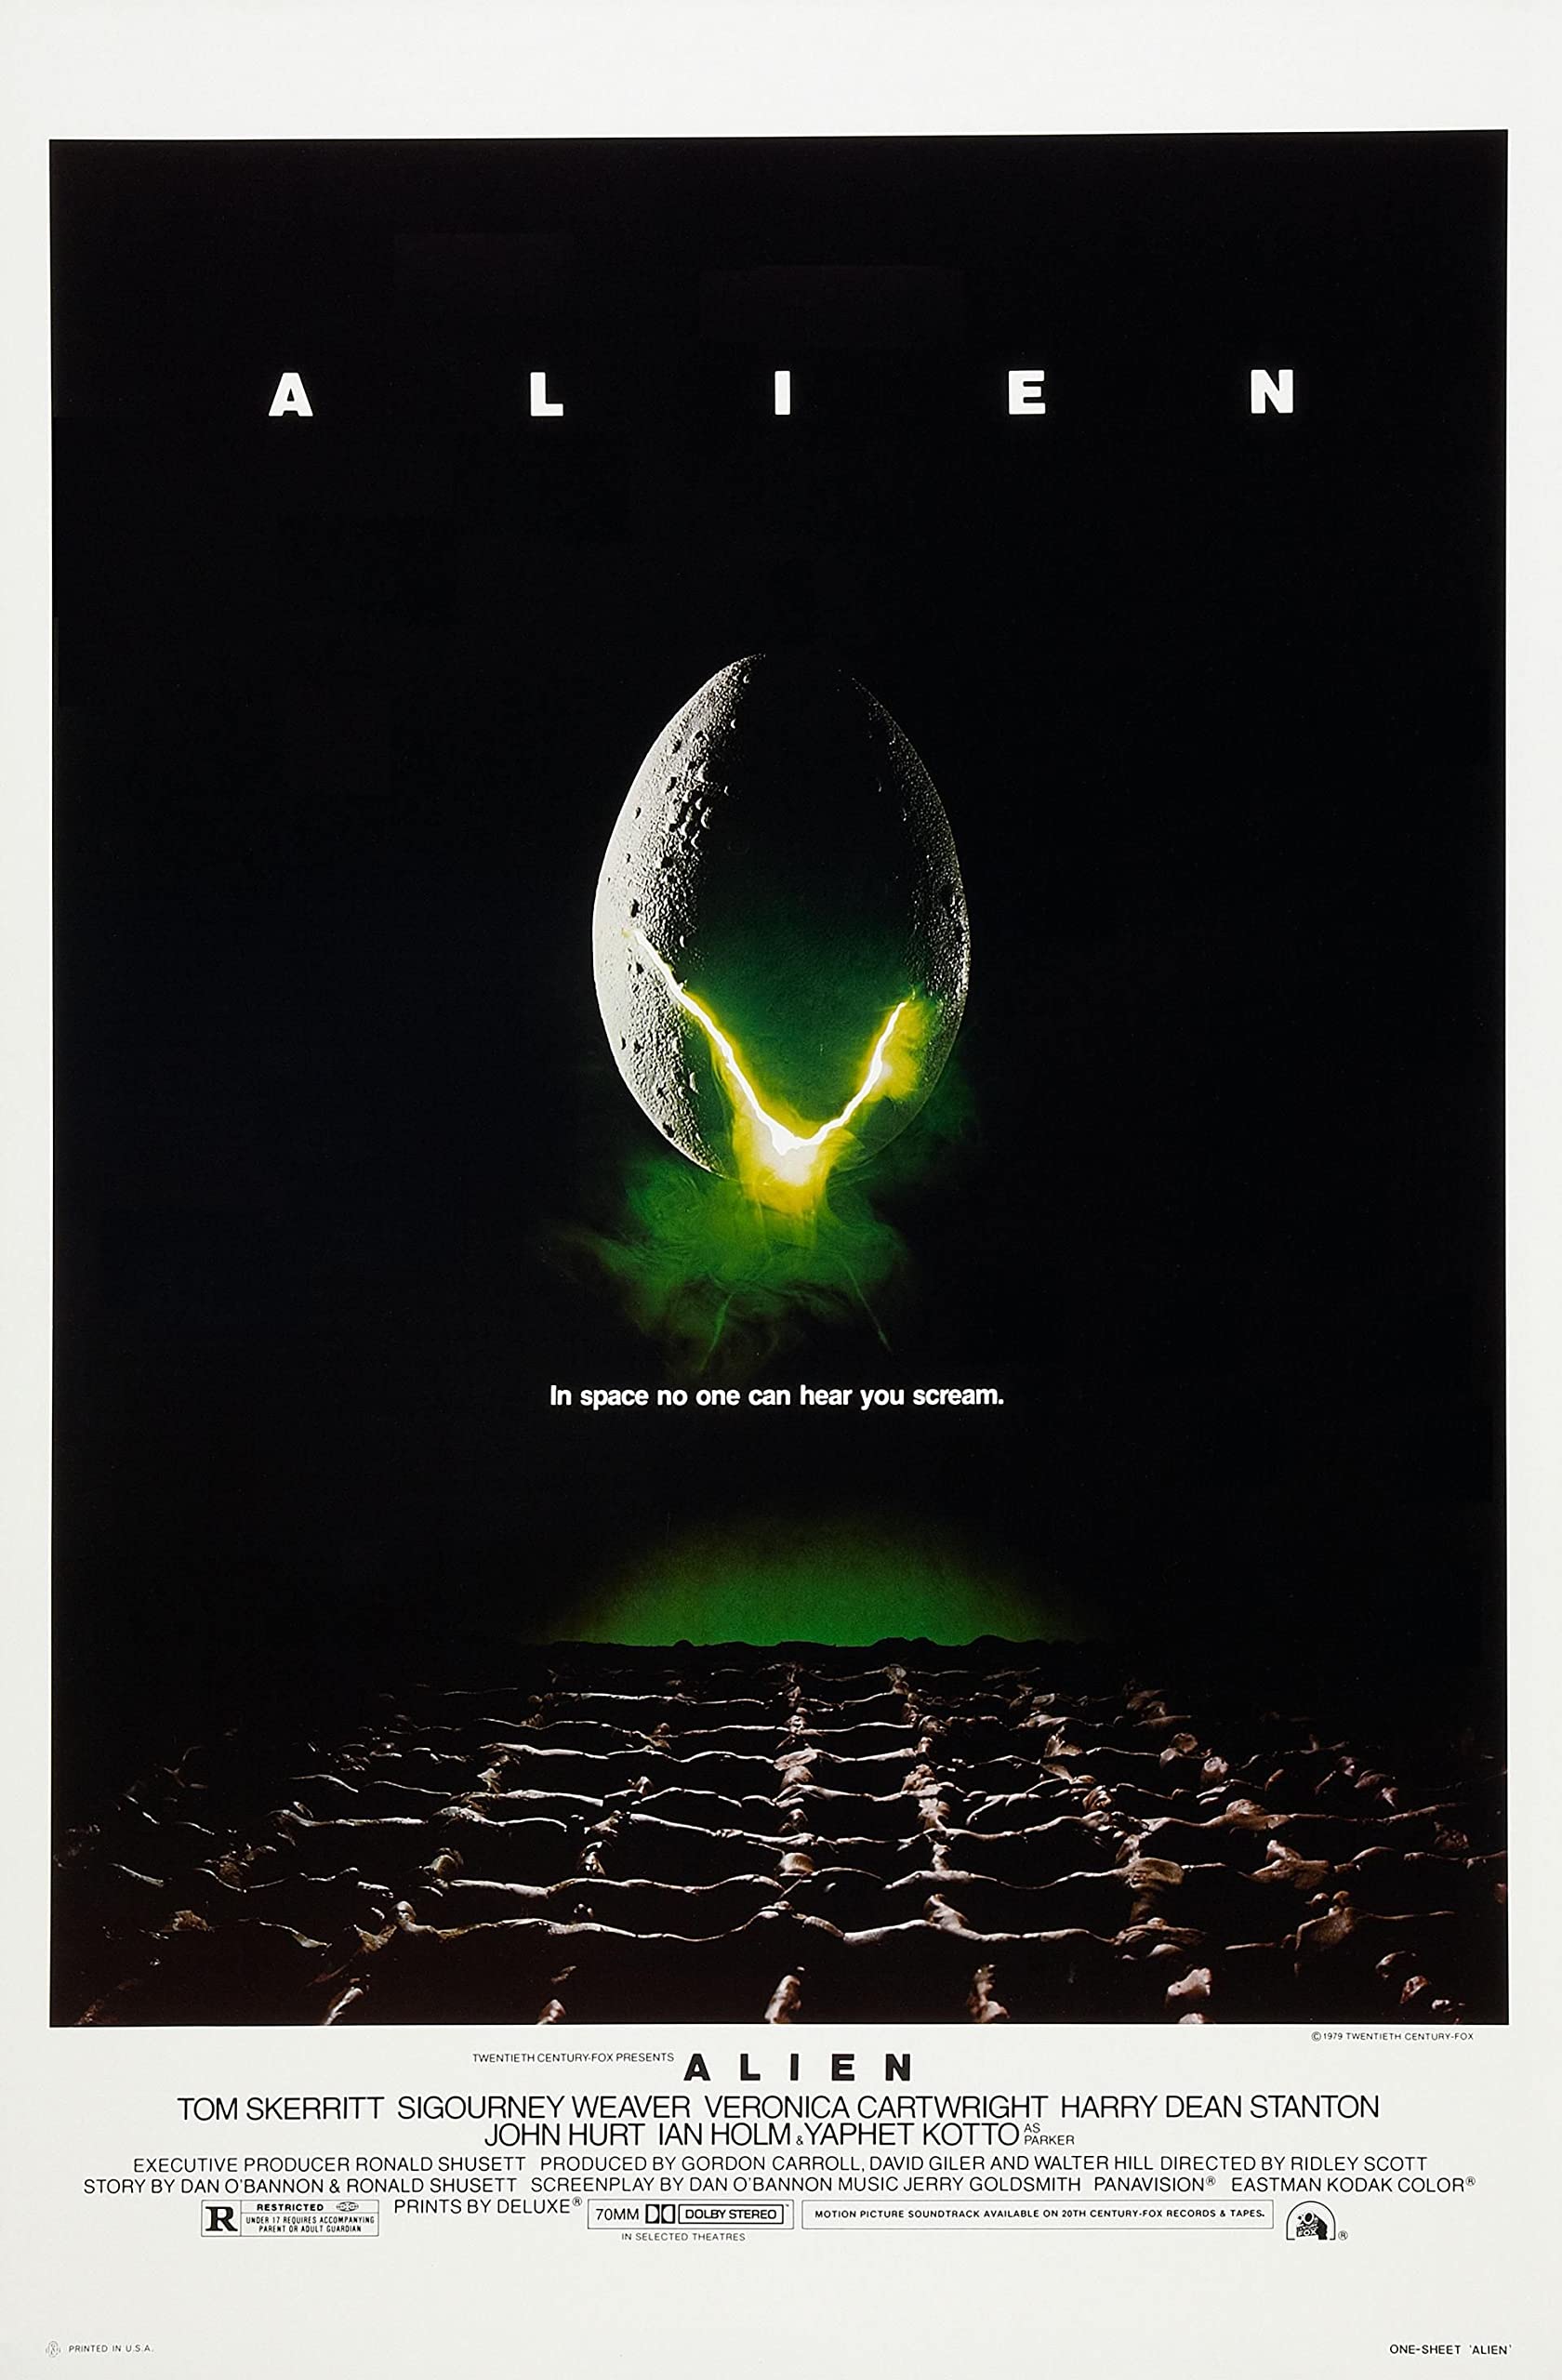 The original poster for Alien depicts a floating, cracking egg over the tagline "In space no one can hear you scream."